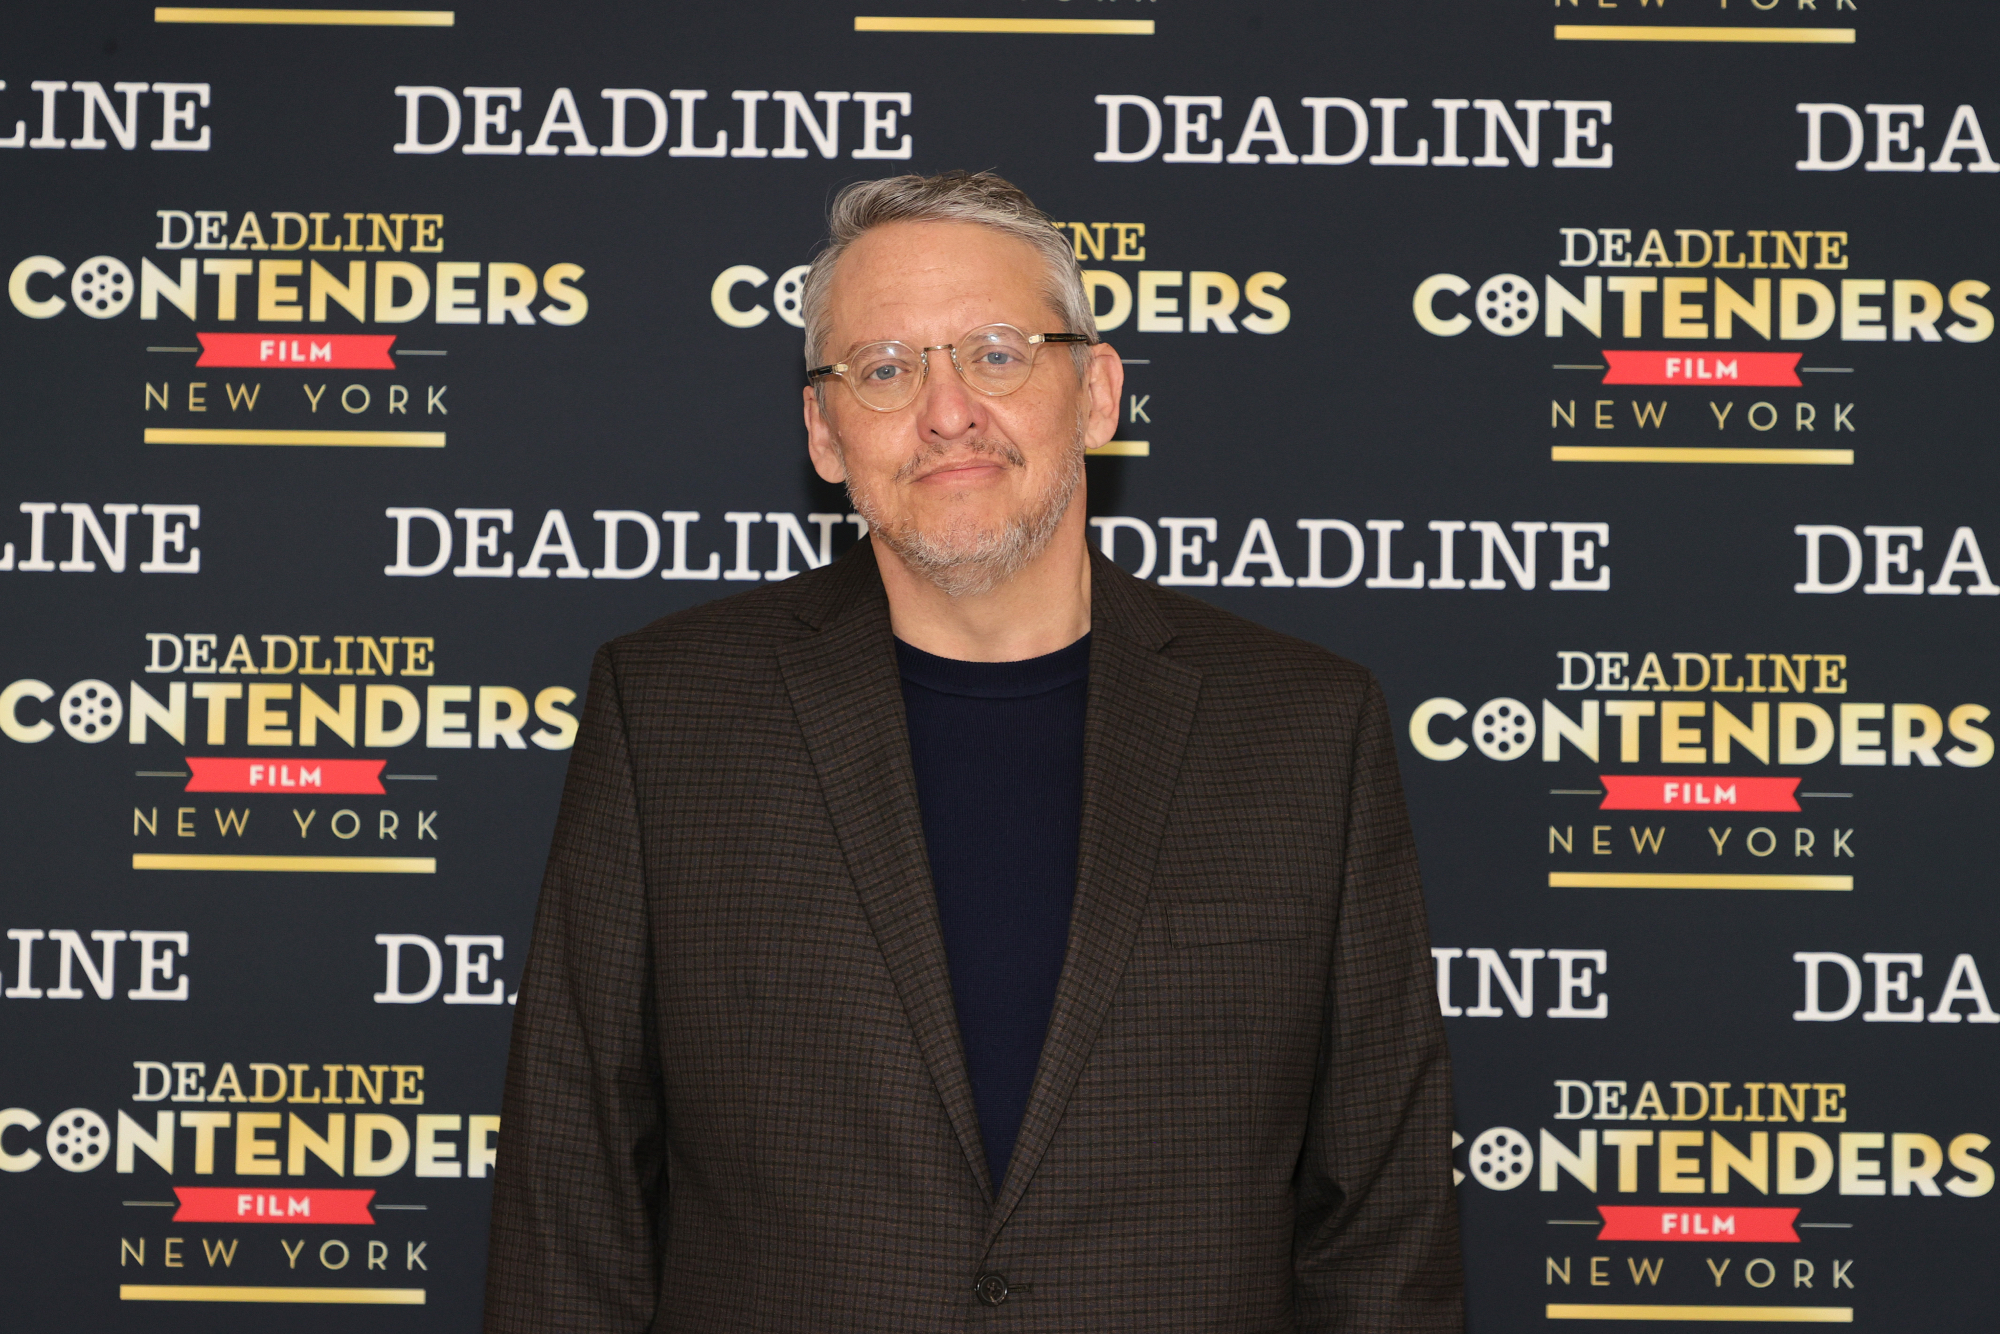 'Don't Look Up' filmmaker Adam Mckay standing in front of a Deadline step and repeat